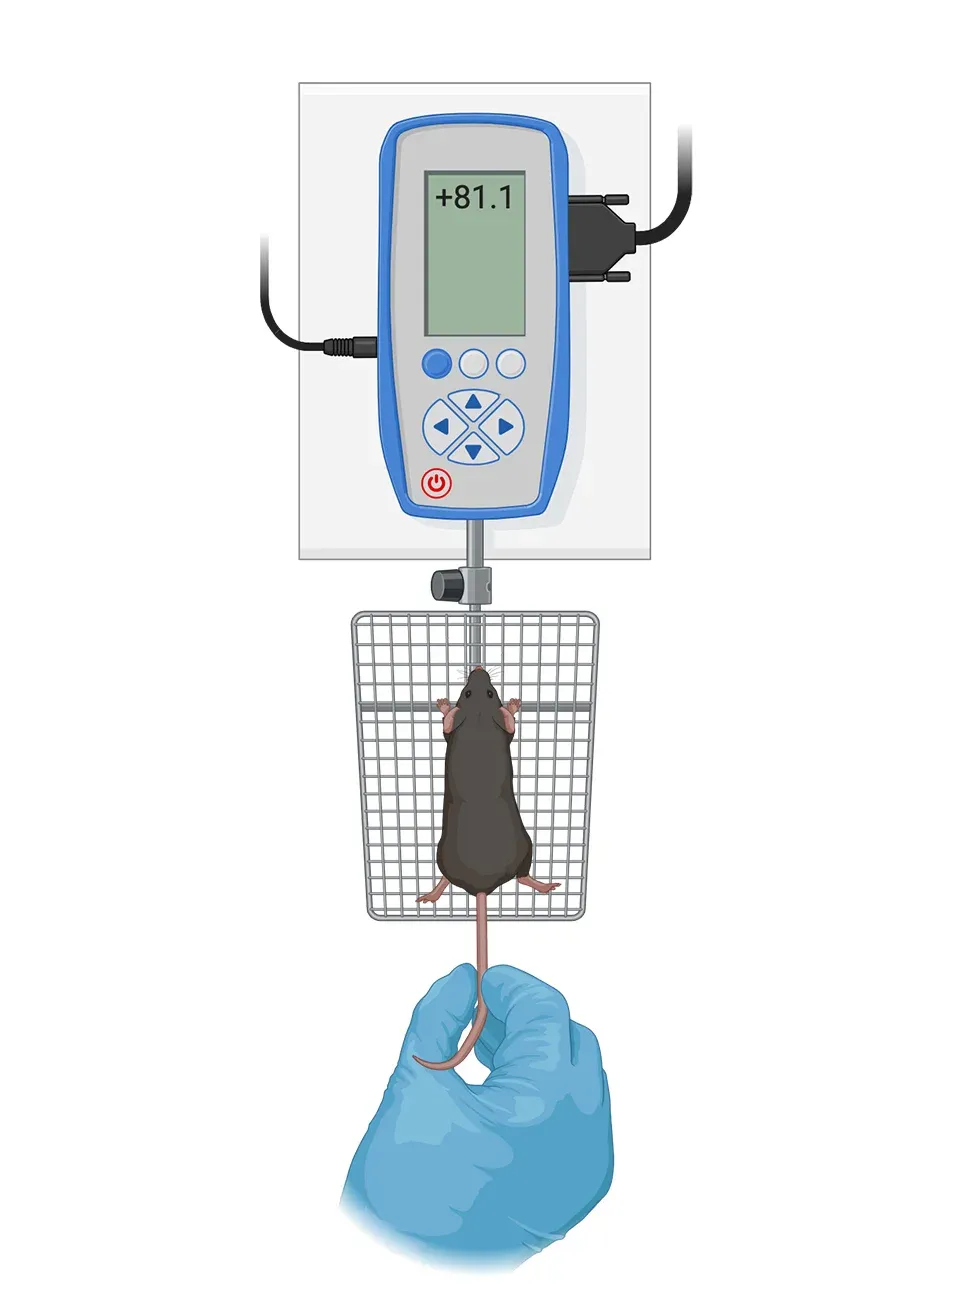 A laboratory mouse, inside an experimental setup for Motor Function - Grip Strength